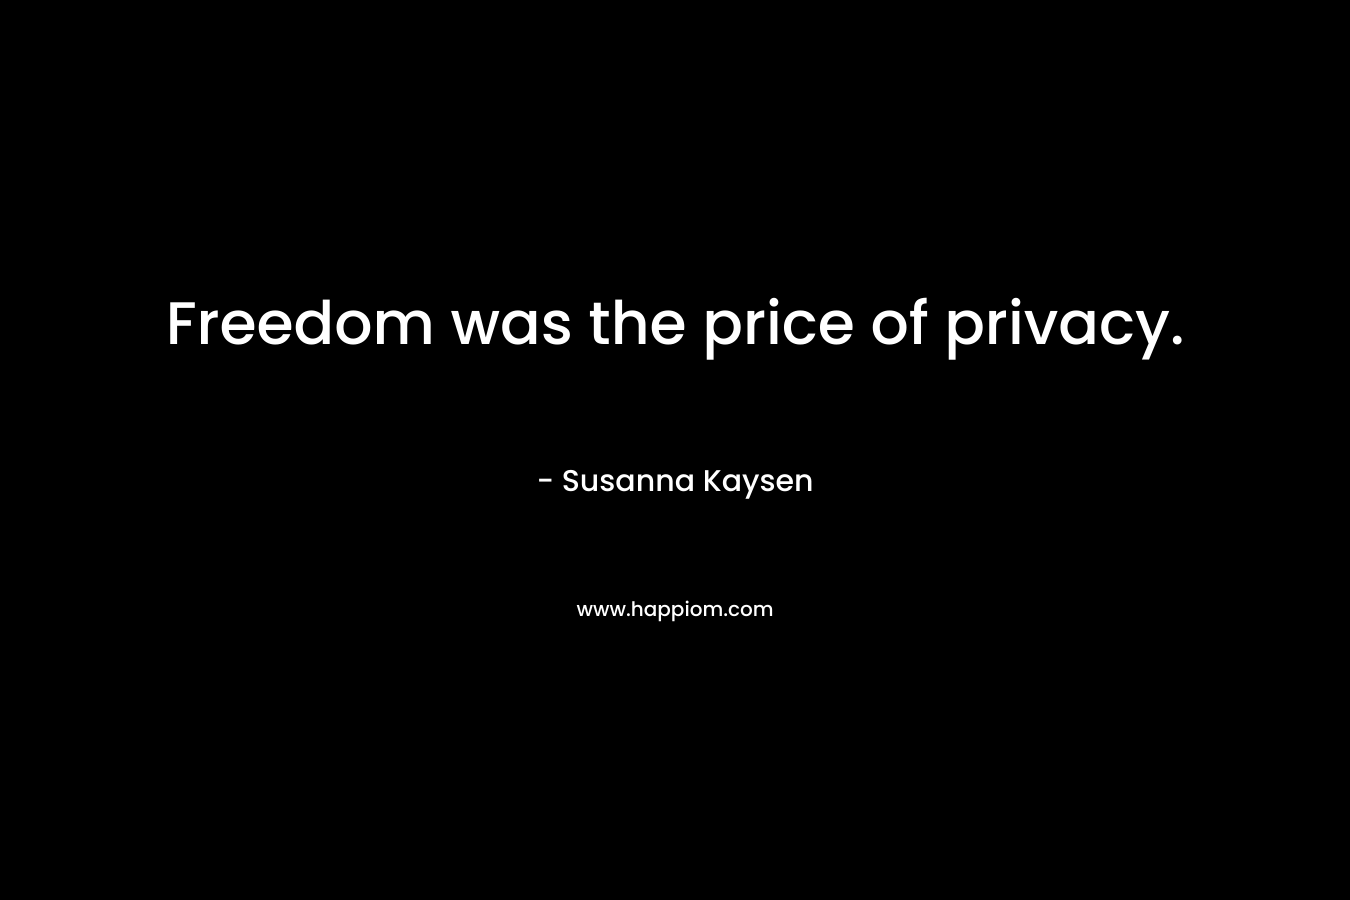 Freedom was the price of privacy. – Susanna Kaysen